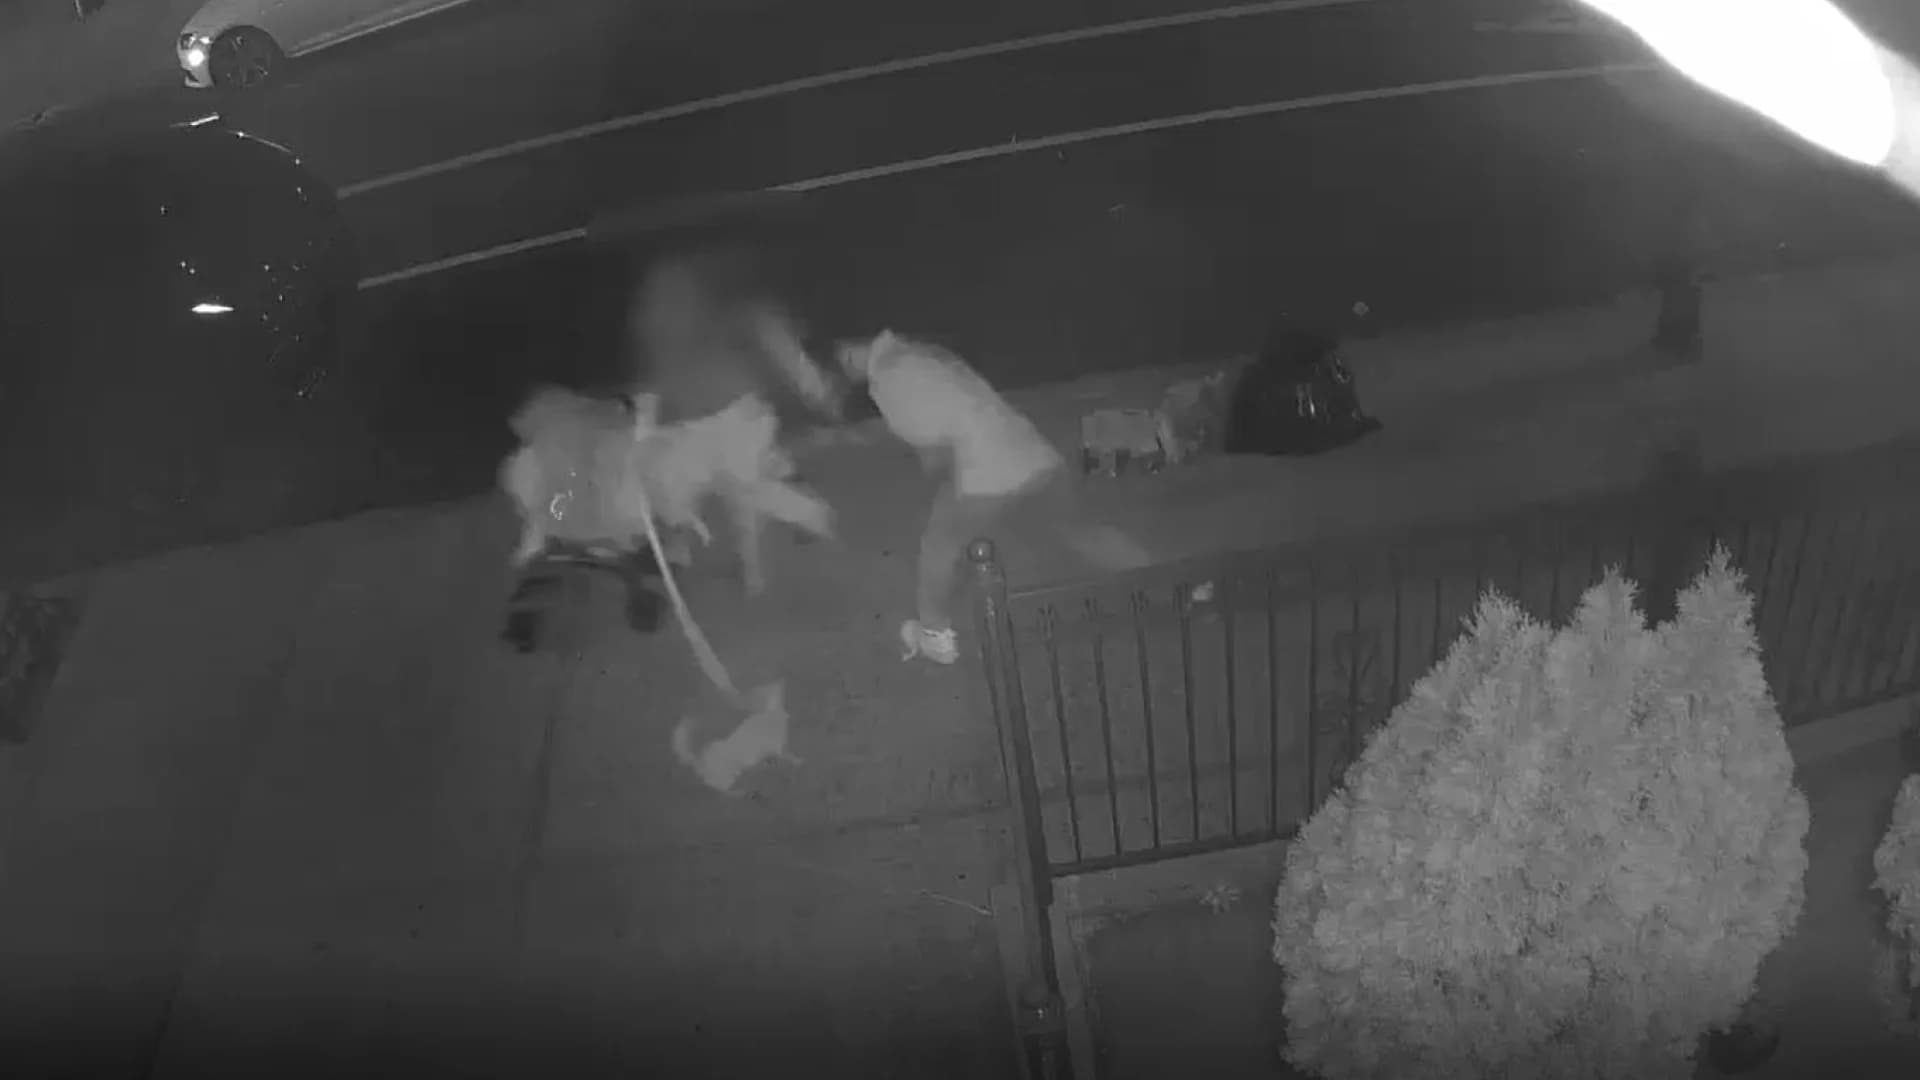 Video shows mother, children fall after suspect forcibly touches mother in Brooklyn